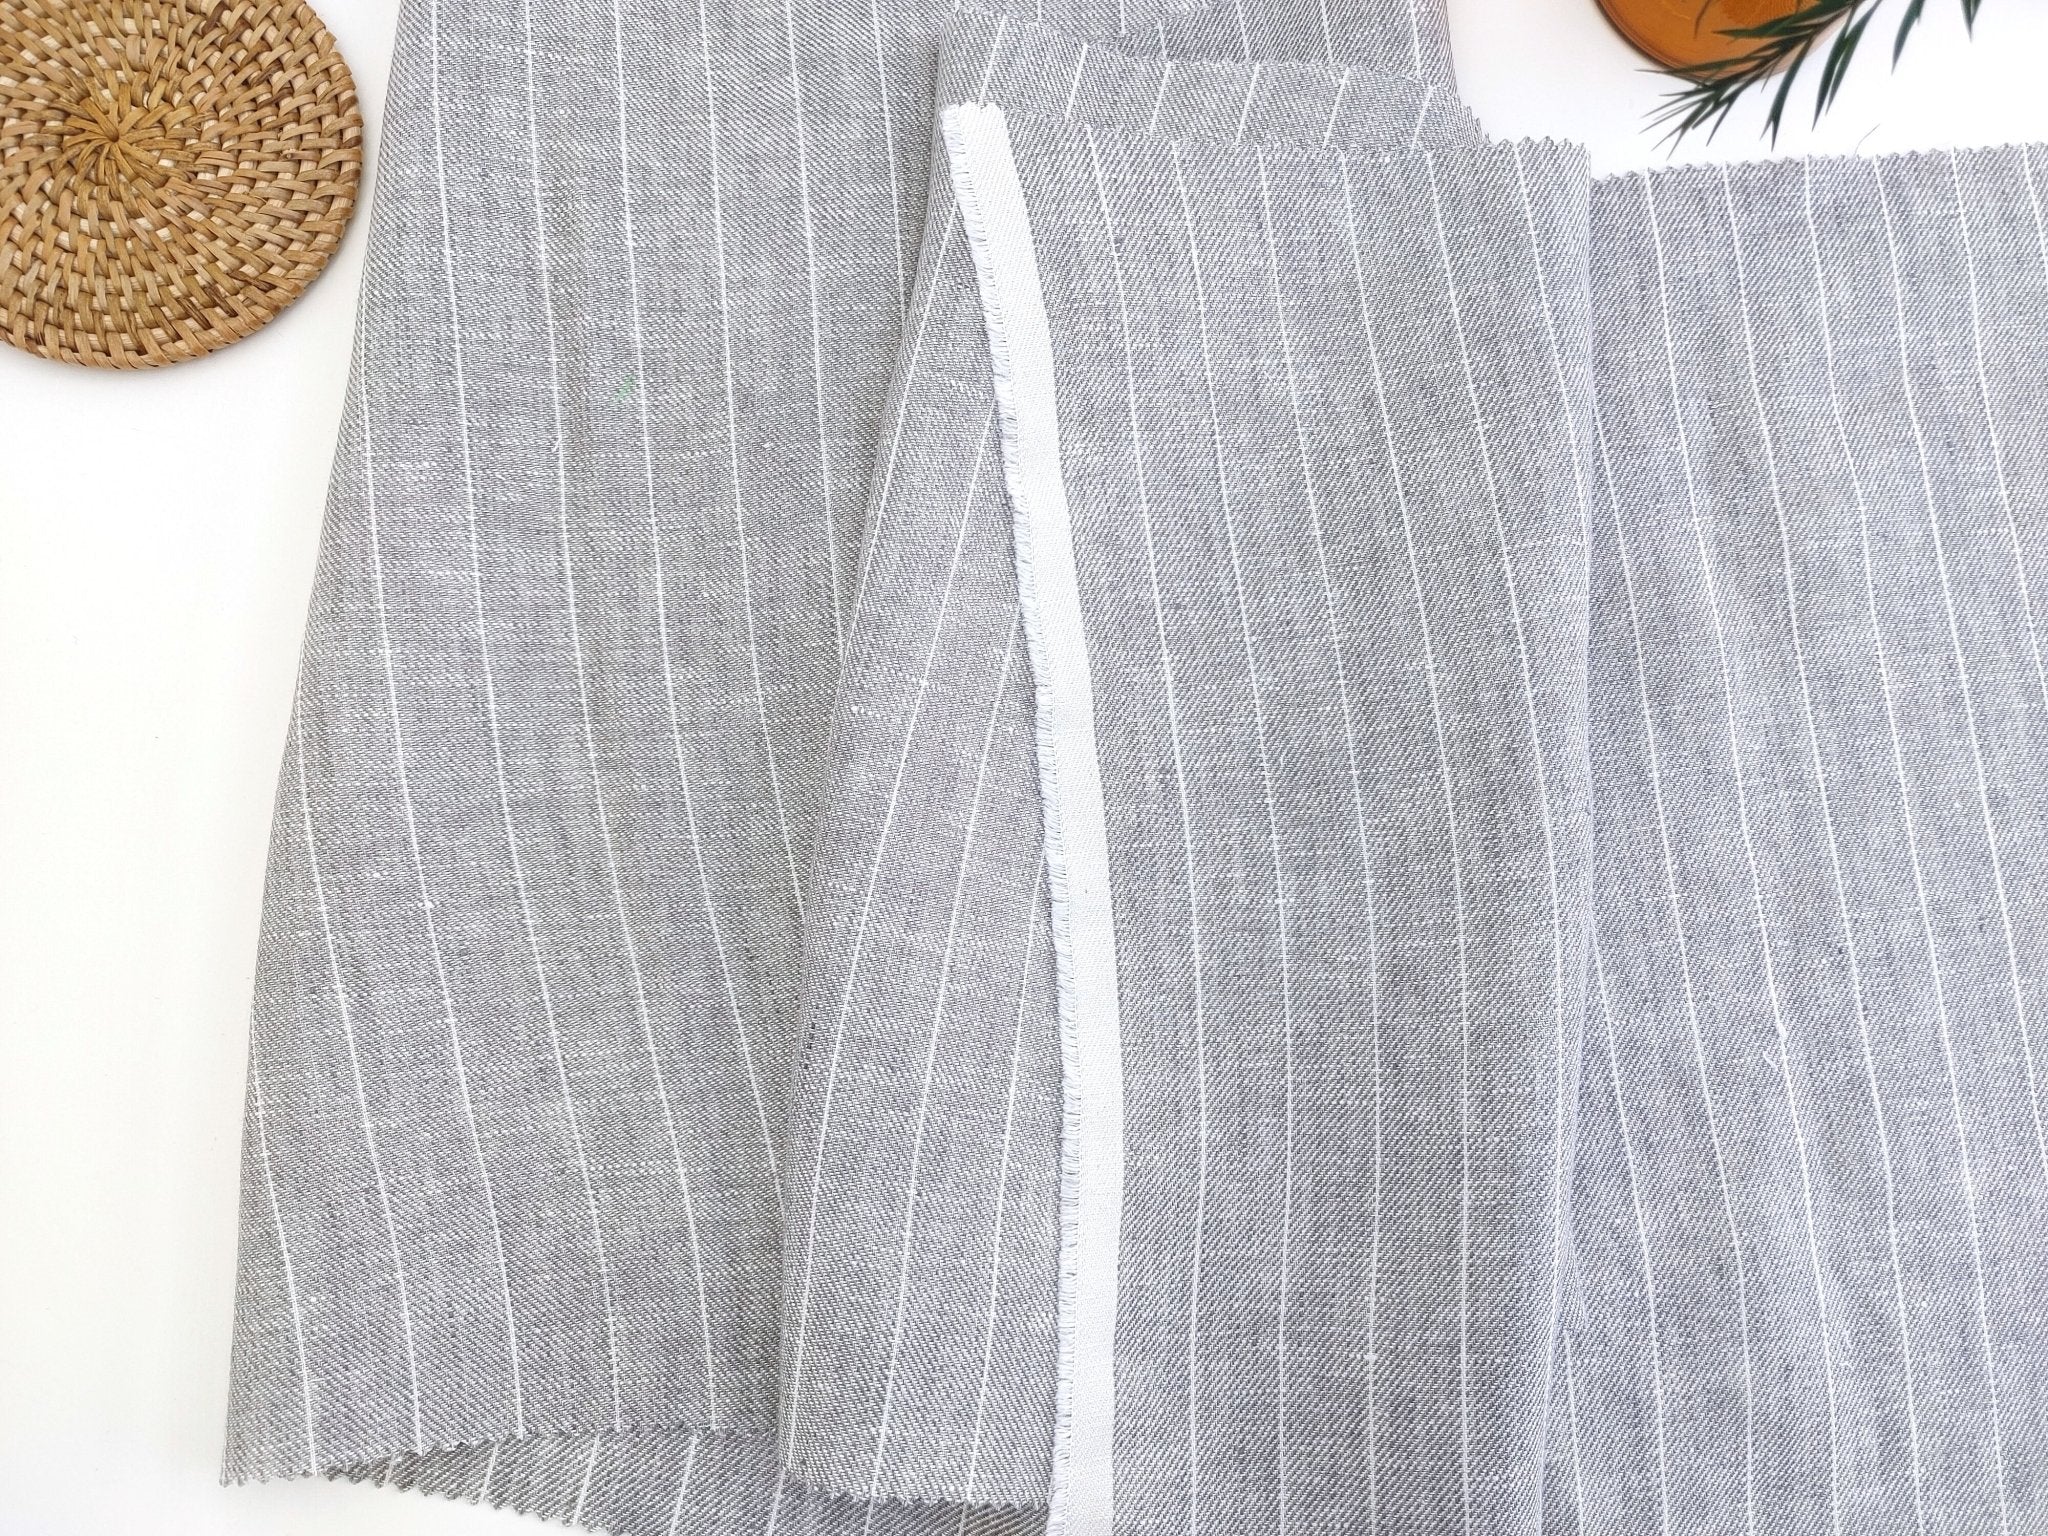 Gentle Grey Stripes: 100% Linen Chambray Twill Fabric 7614 - The Linen Lab - Grey